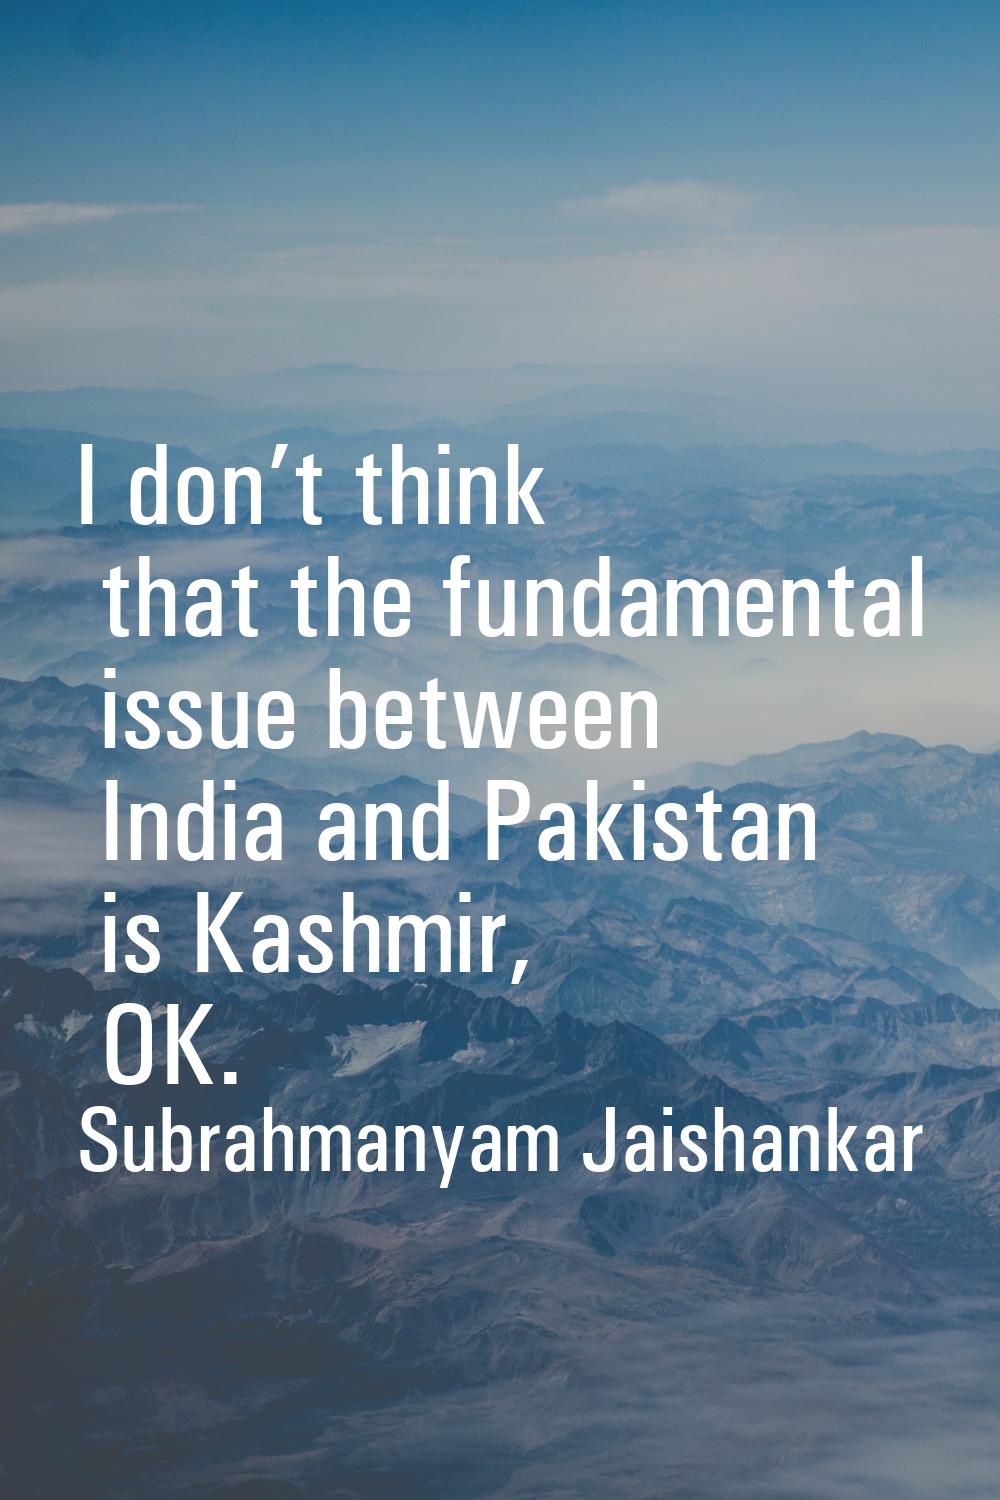 I don’t think that the fundamental issue between India and Pakistan is Kashmir, OK.